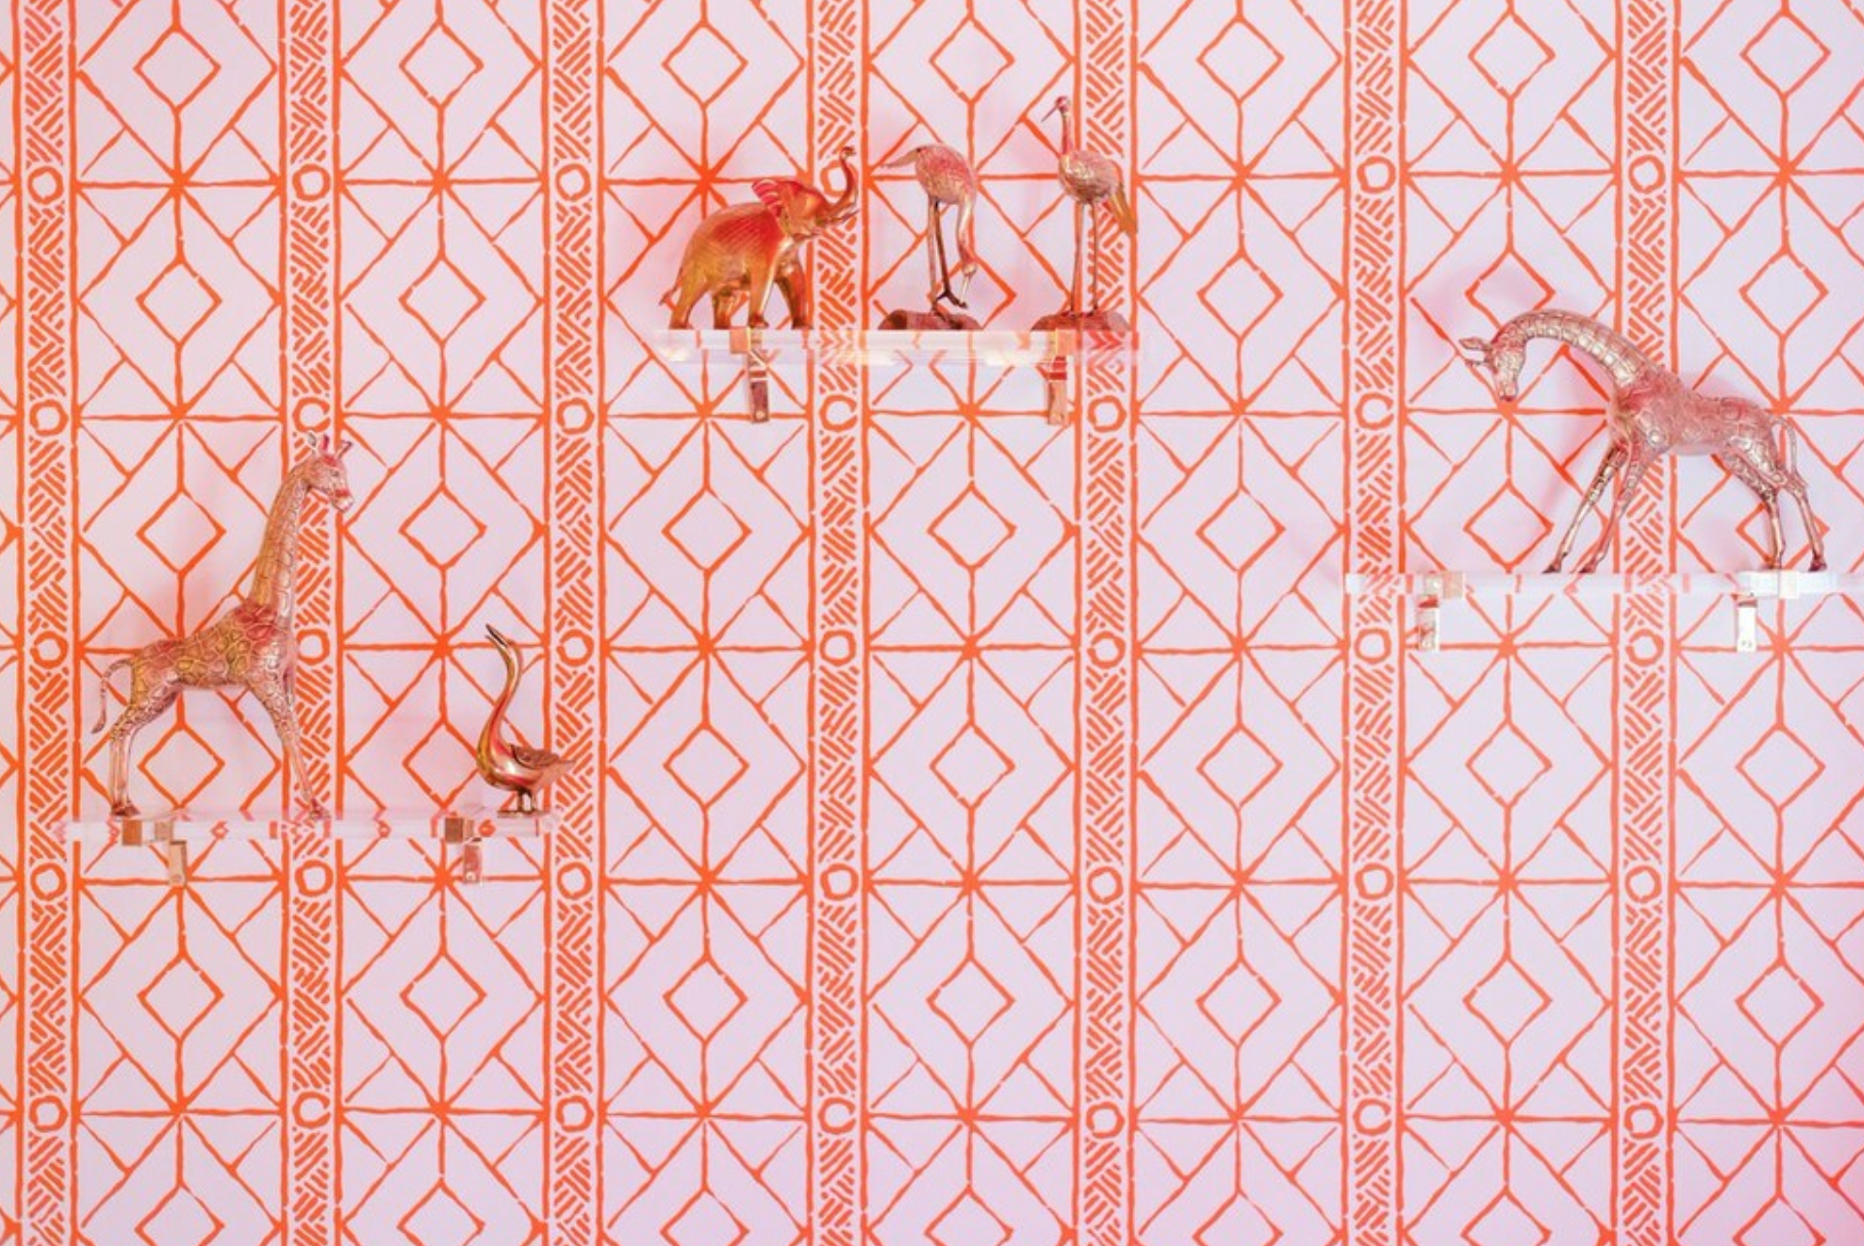 Dwell-Chic-Pink-Paradise-Bedroom-Wallpaper-Detail-And-Animals.png